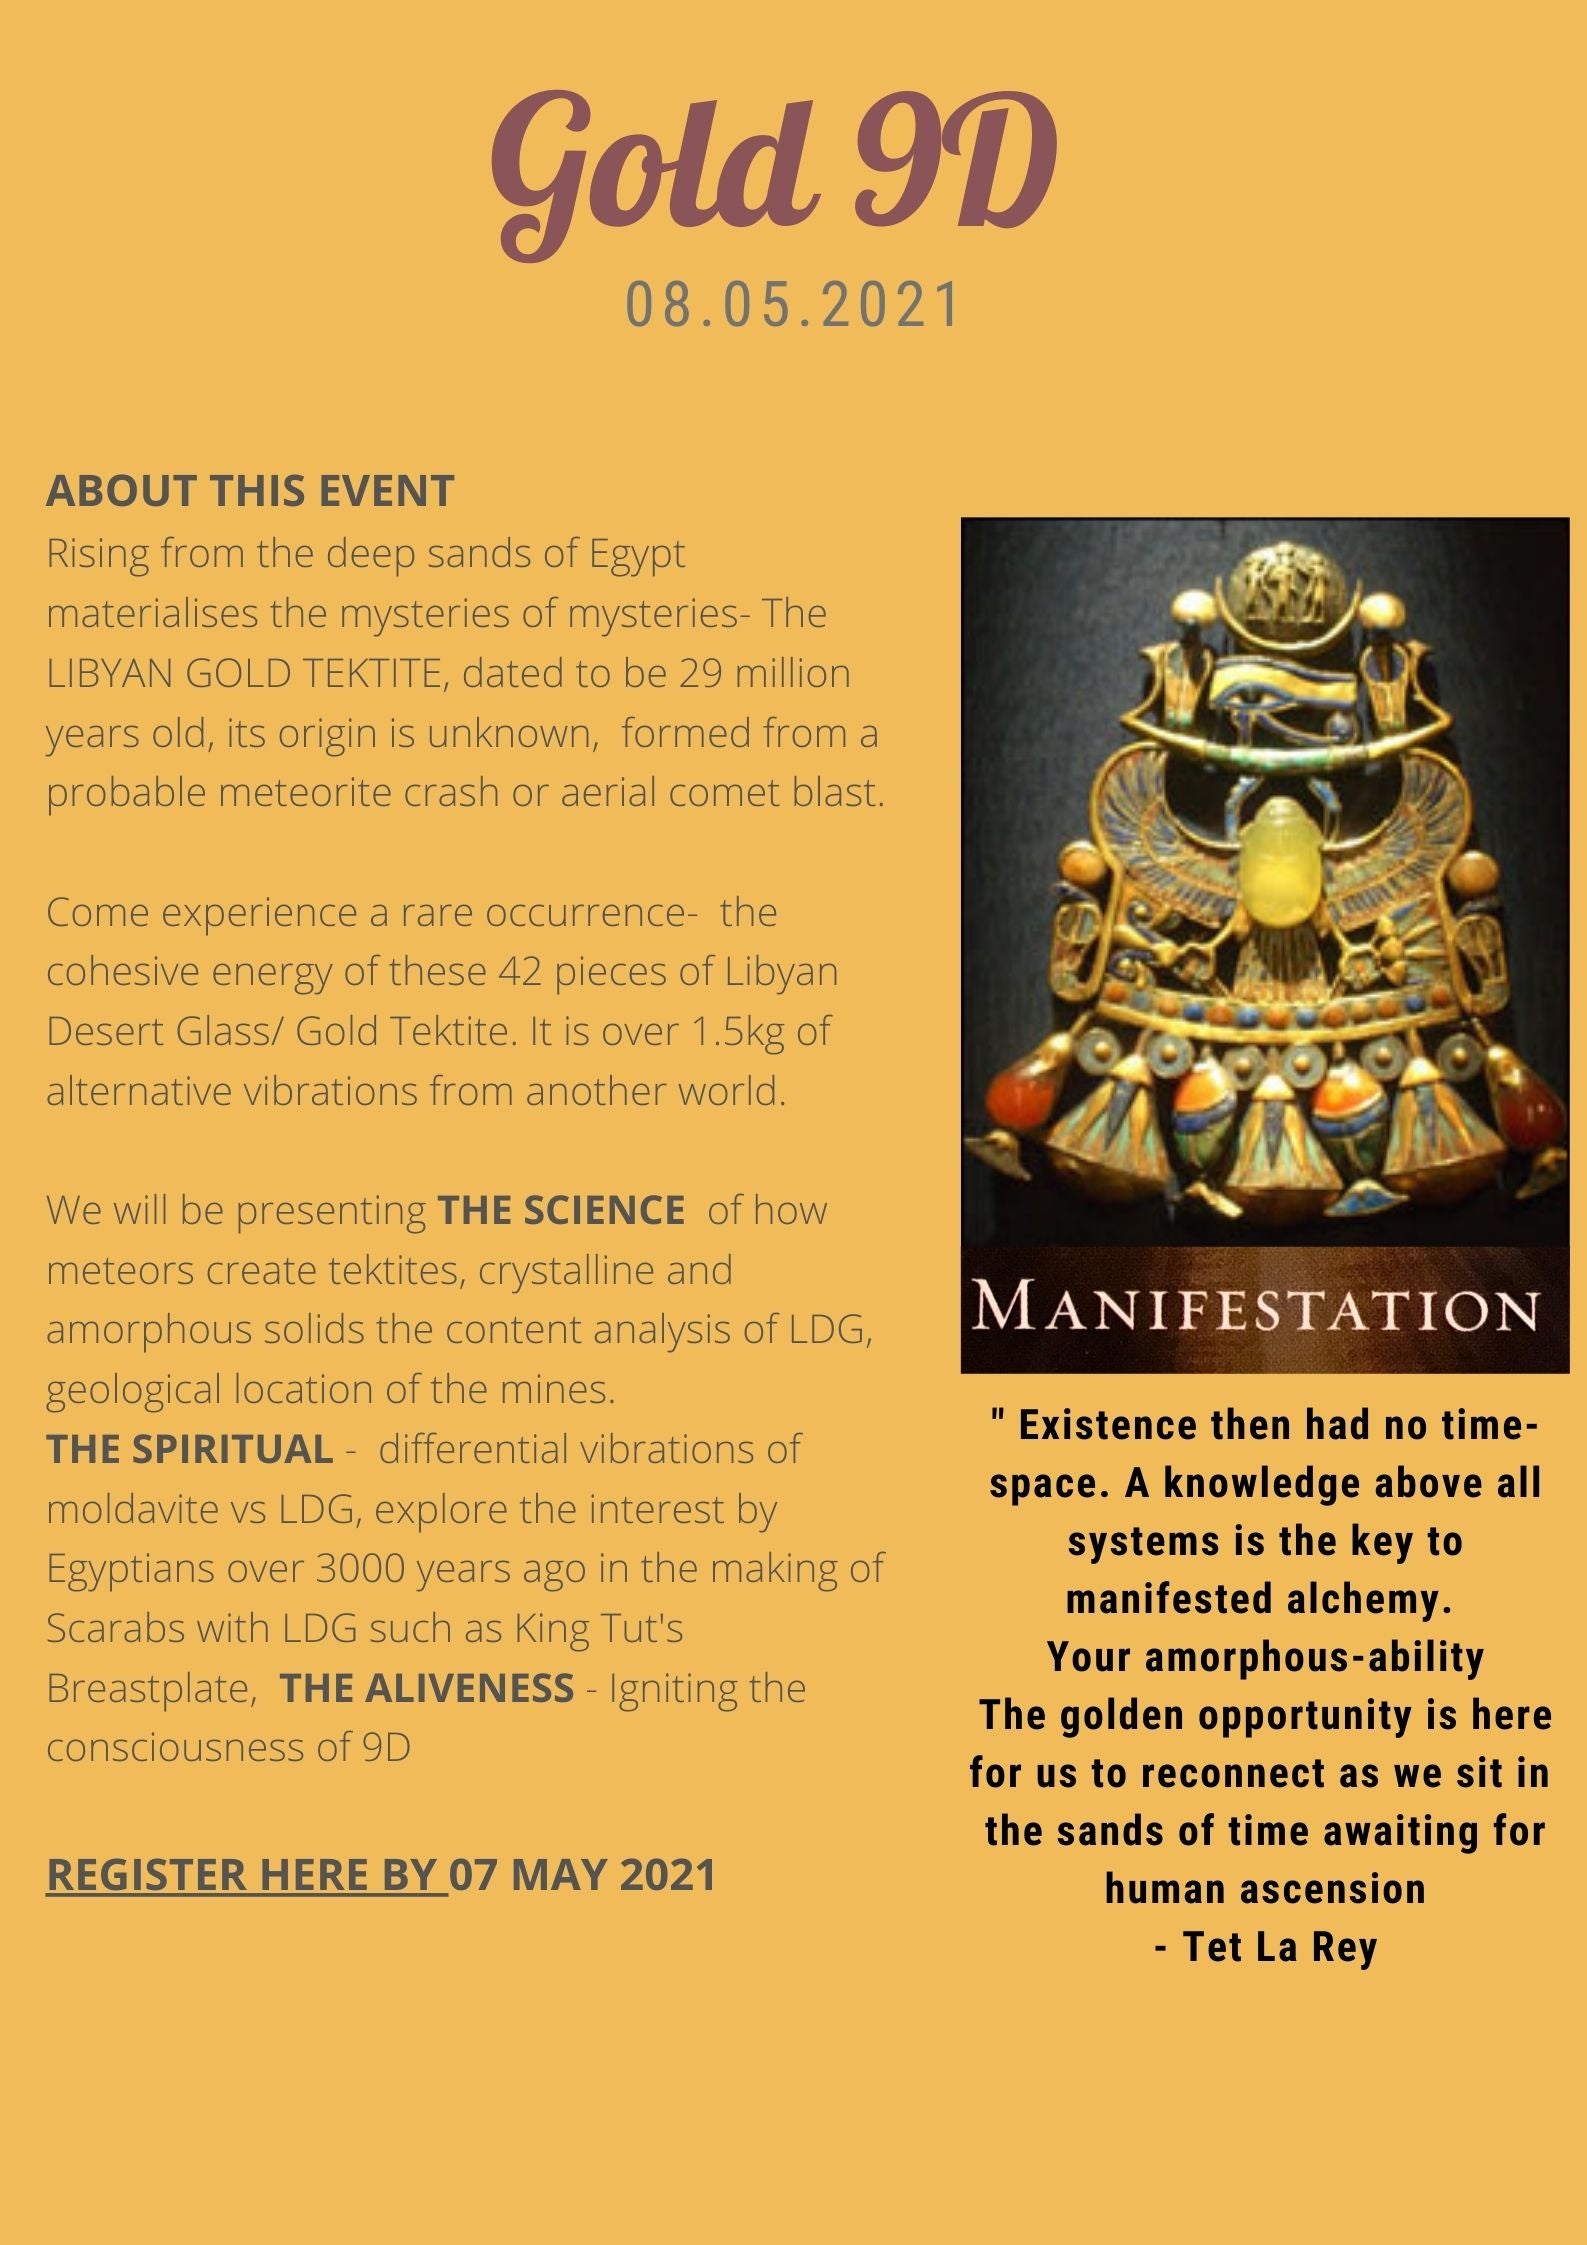 Meditation Alchemy Sessions- "GoLD 9D " 8th MAY 2021, Saturday 3pm